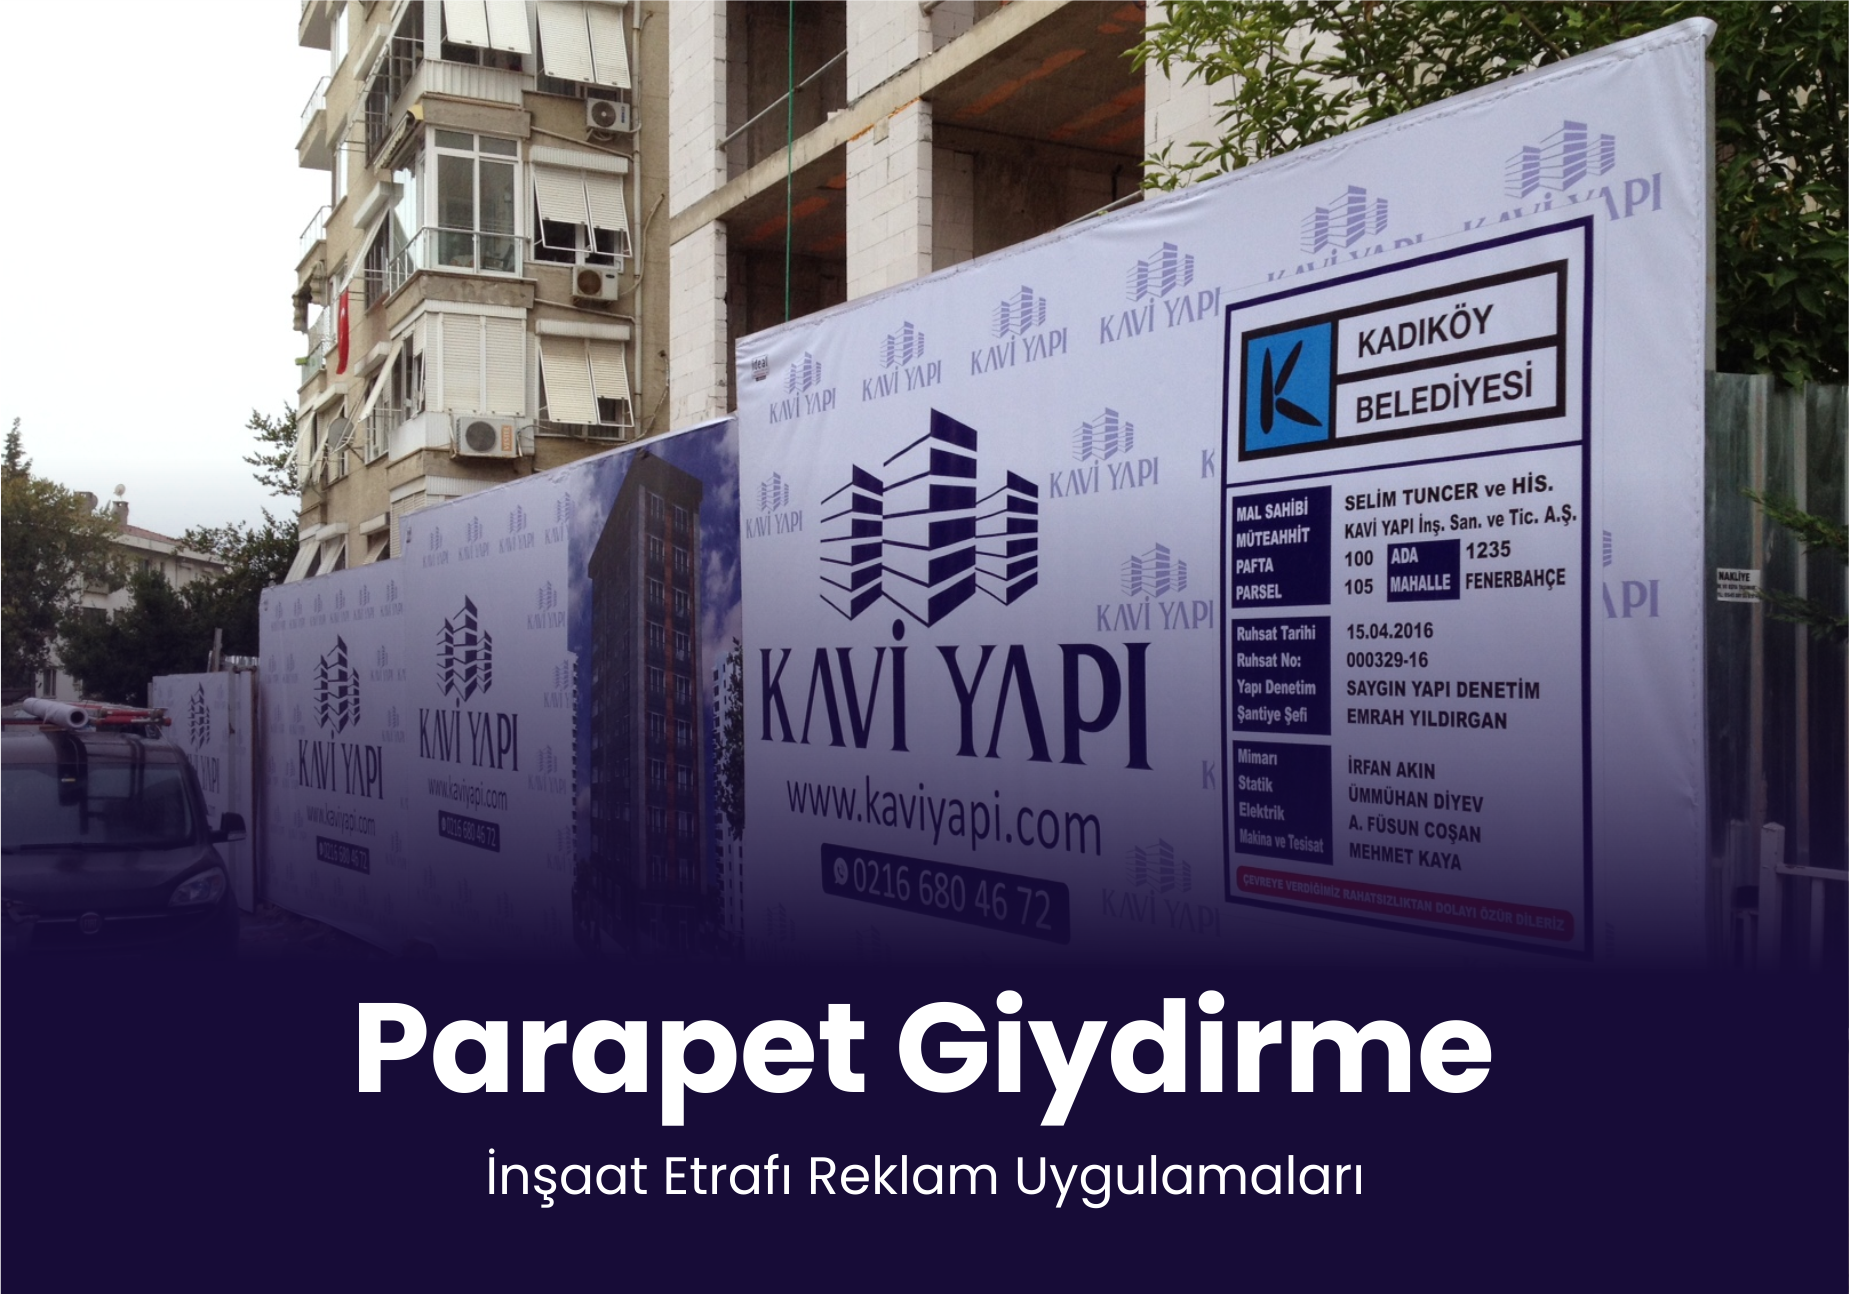 You are currently viewing Parapet Giydirme